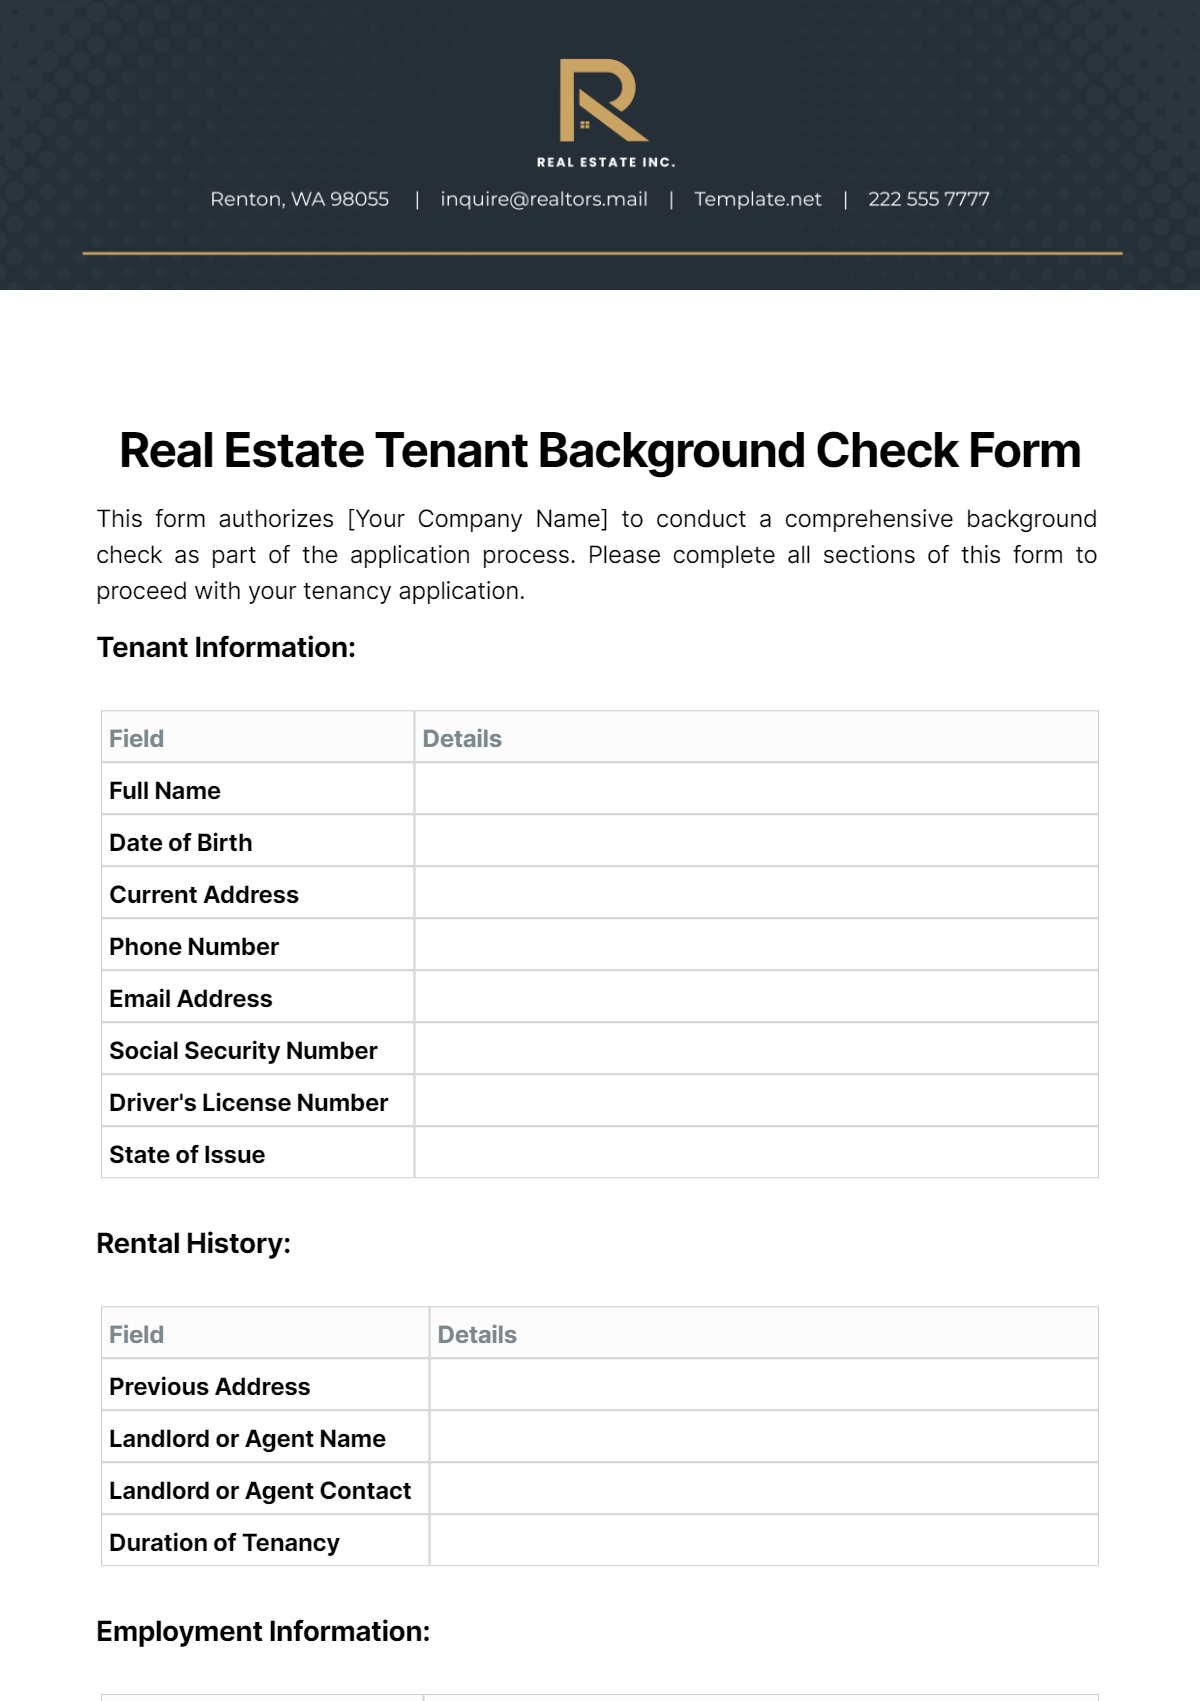 Real Estate Tenant Background Check Form Template